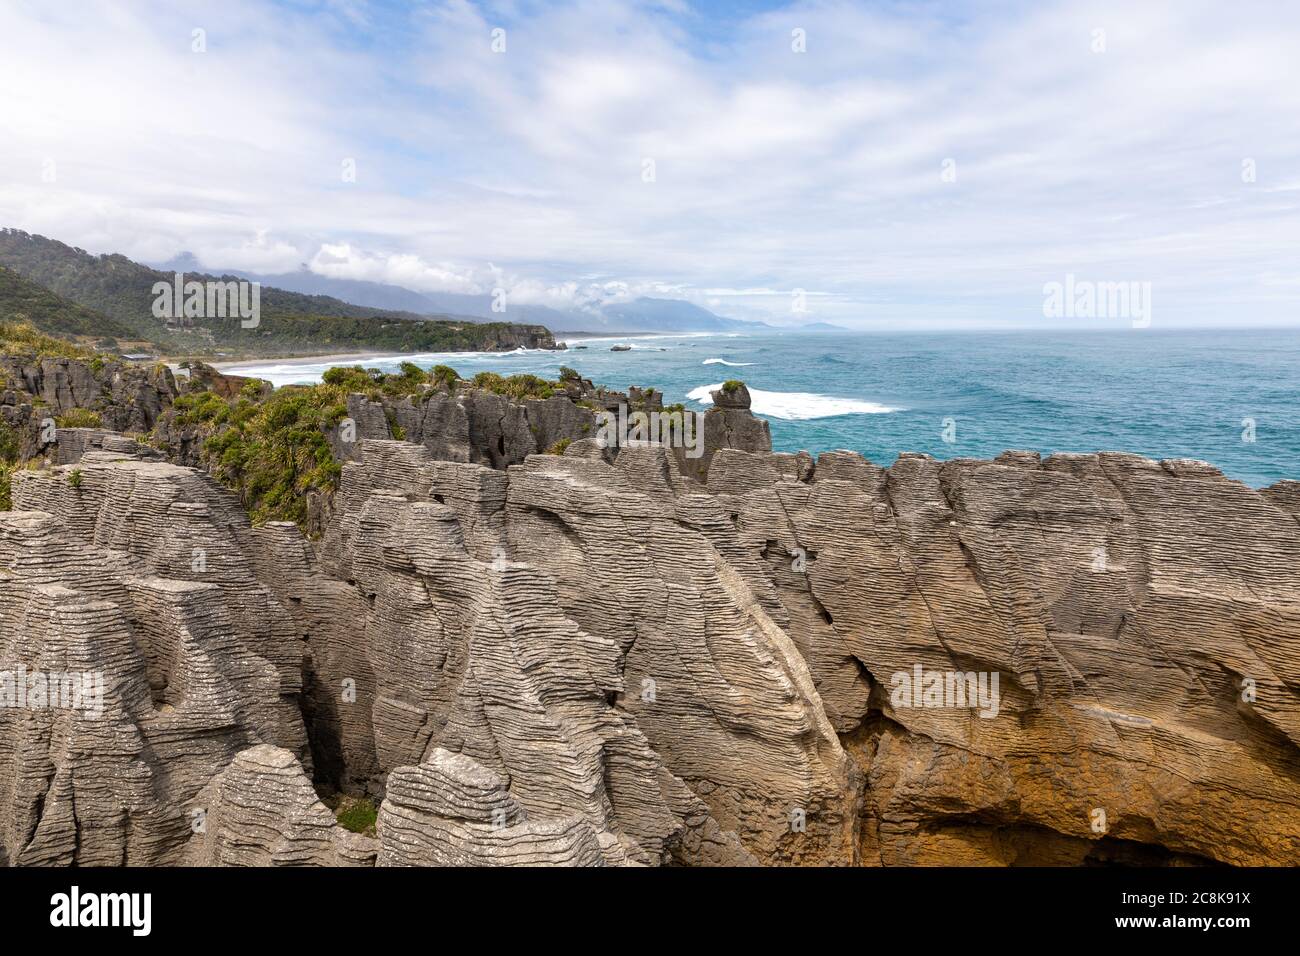 The famous Pancake Rocks on Dolomite Point with a view out over the sea towards mountains covered in clouds. Dolomite Point, South Island, New Zealand Stock Photo